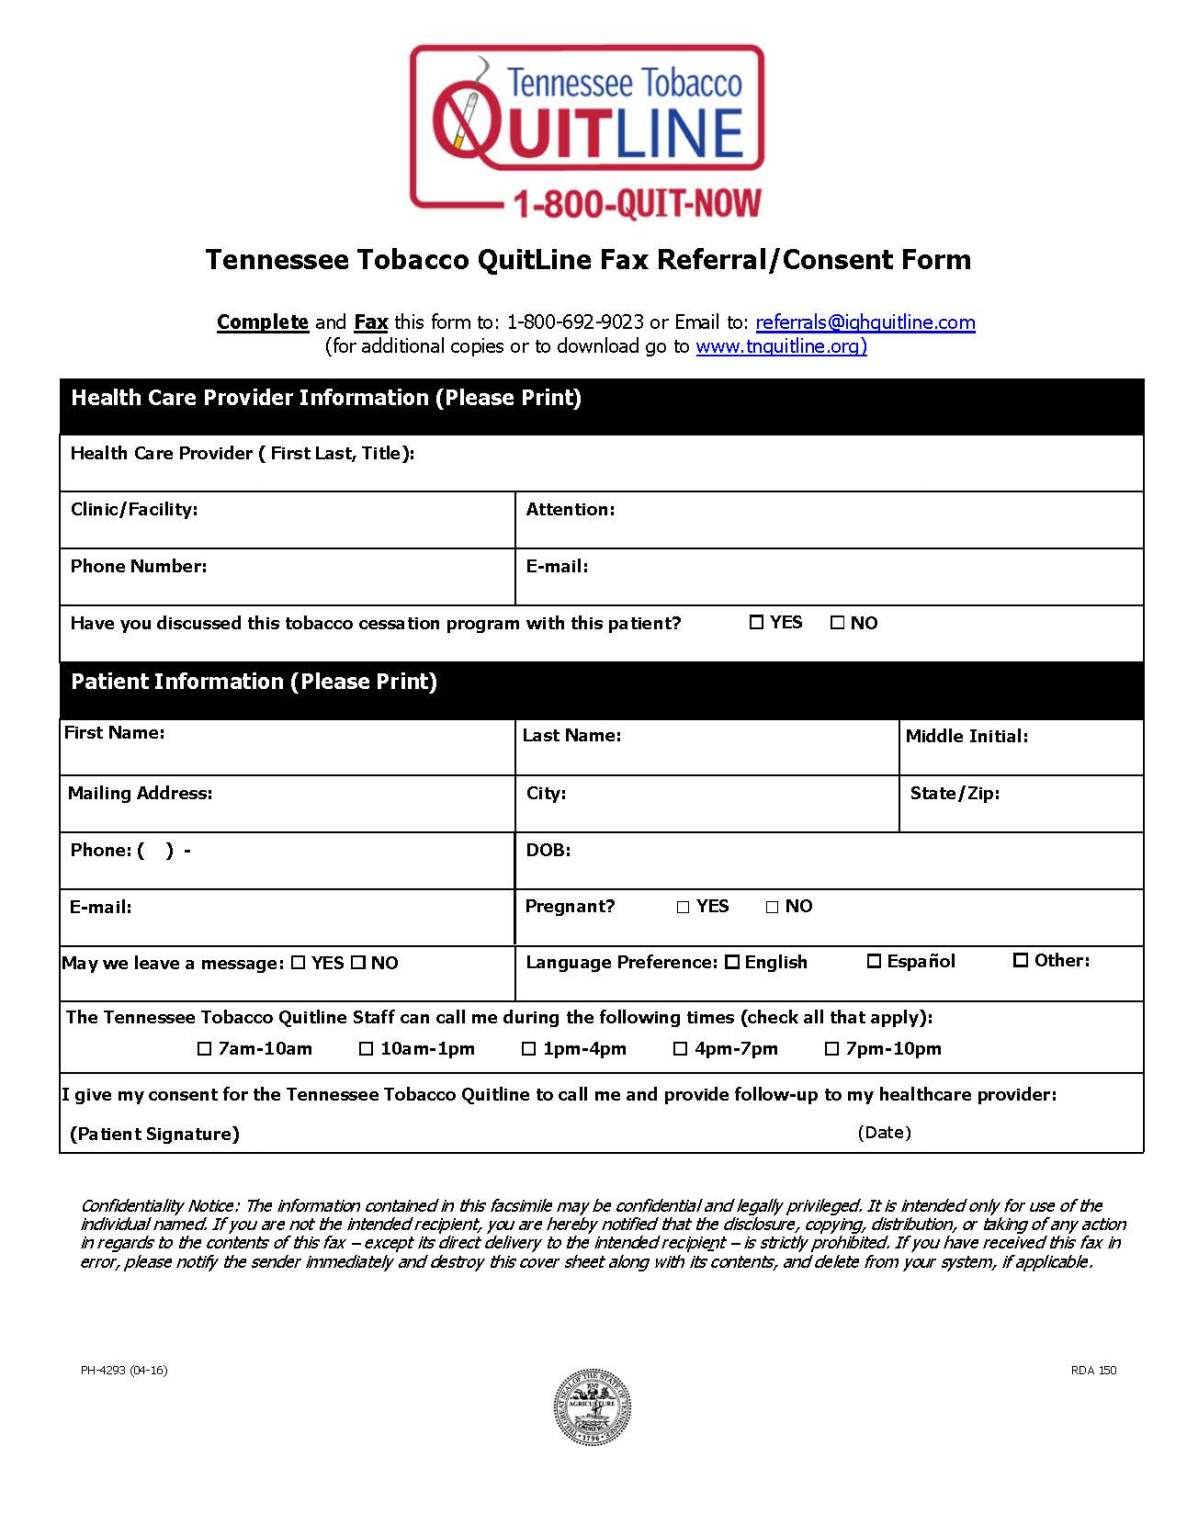 Tennessee Tobacco Quitline Fax Referral Form